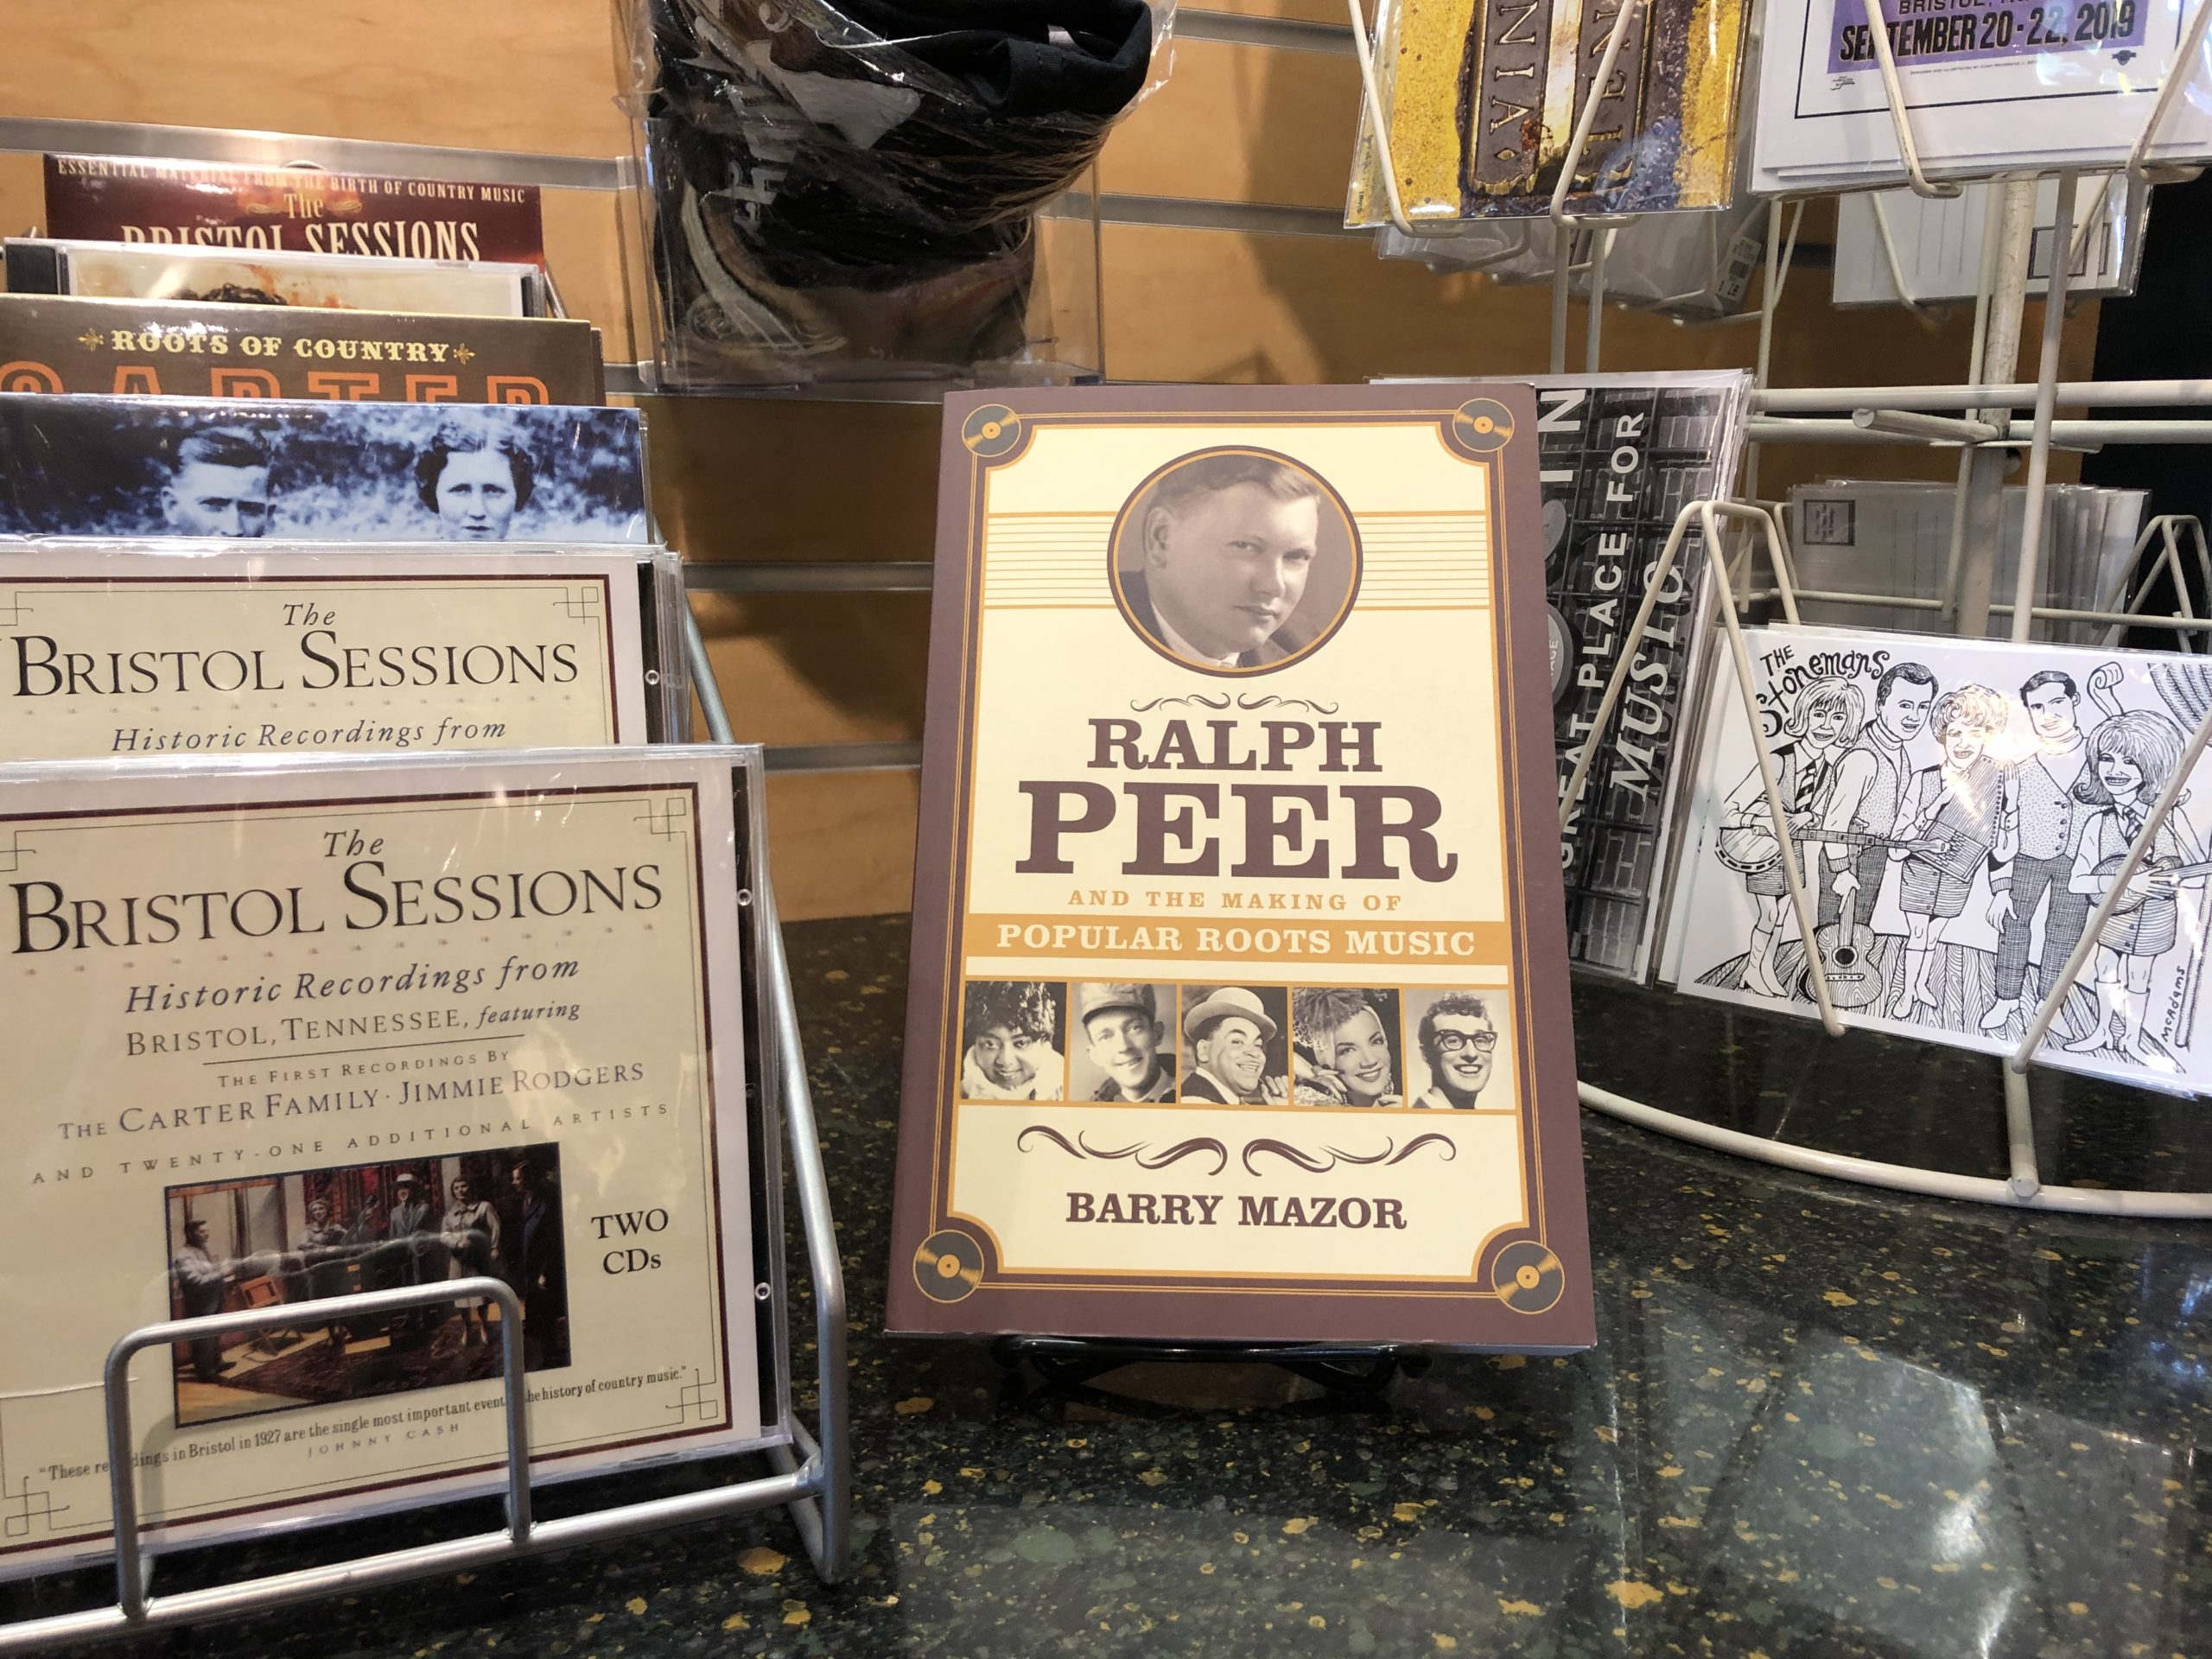 The book is on display in front of a postcard rack with a Stonemans postcard and beside of a CD display, including CDs of the Bristol Sessions and The Carter Family.